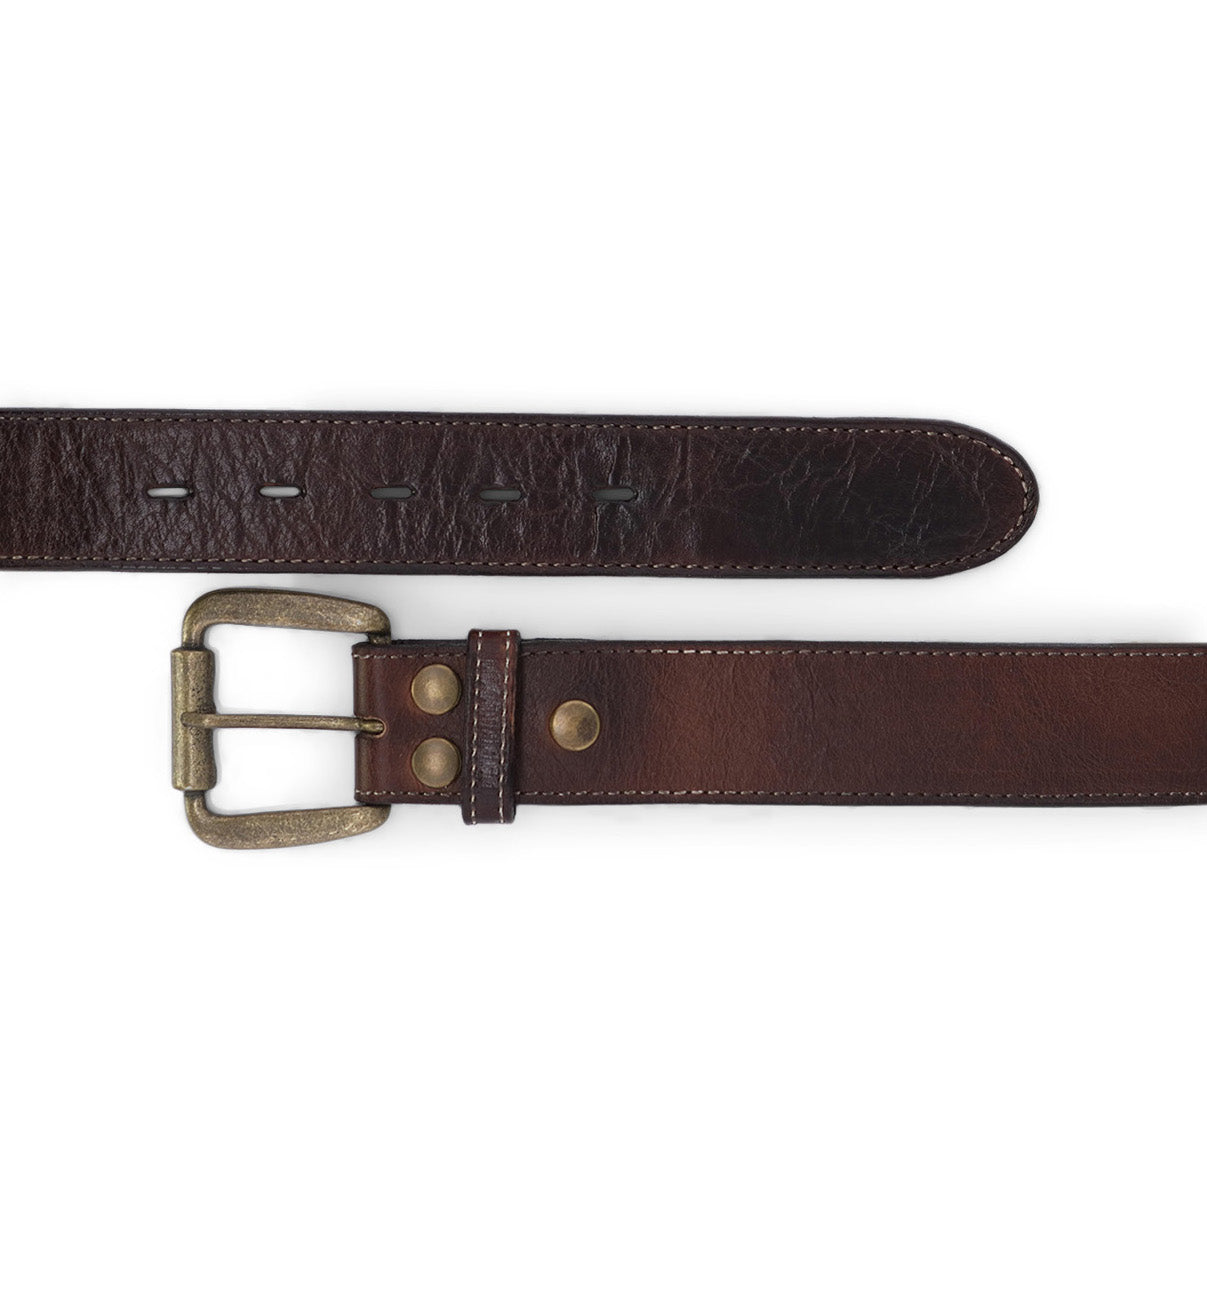 Two brown leather Meander belts with different textures and removable buckles, arranged parallel on a white background by Bed Stu.